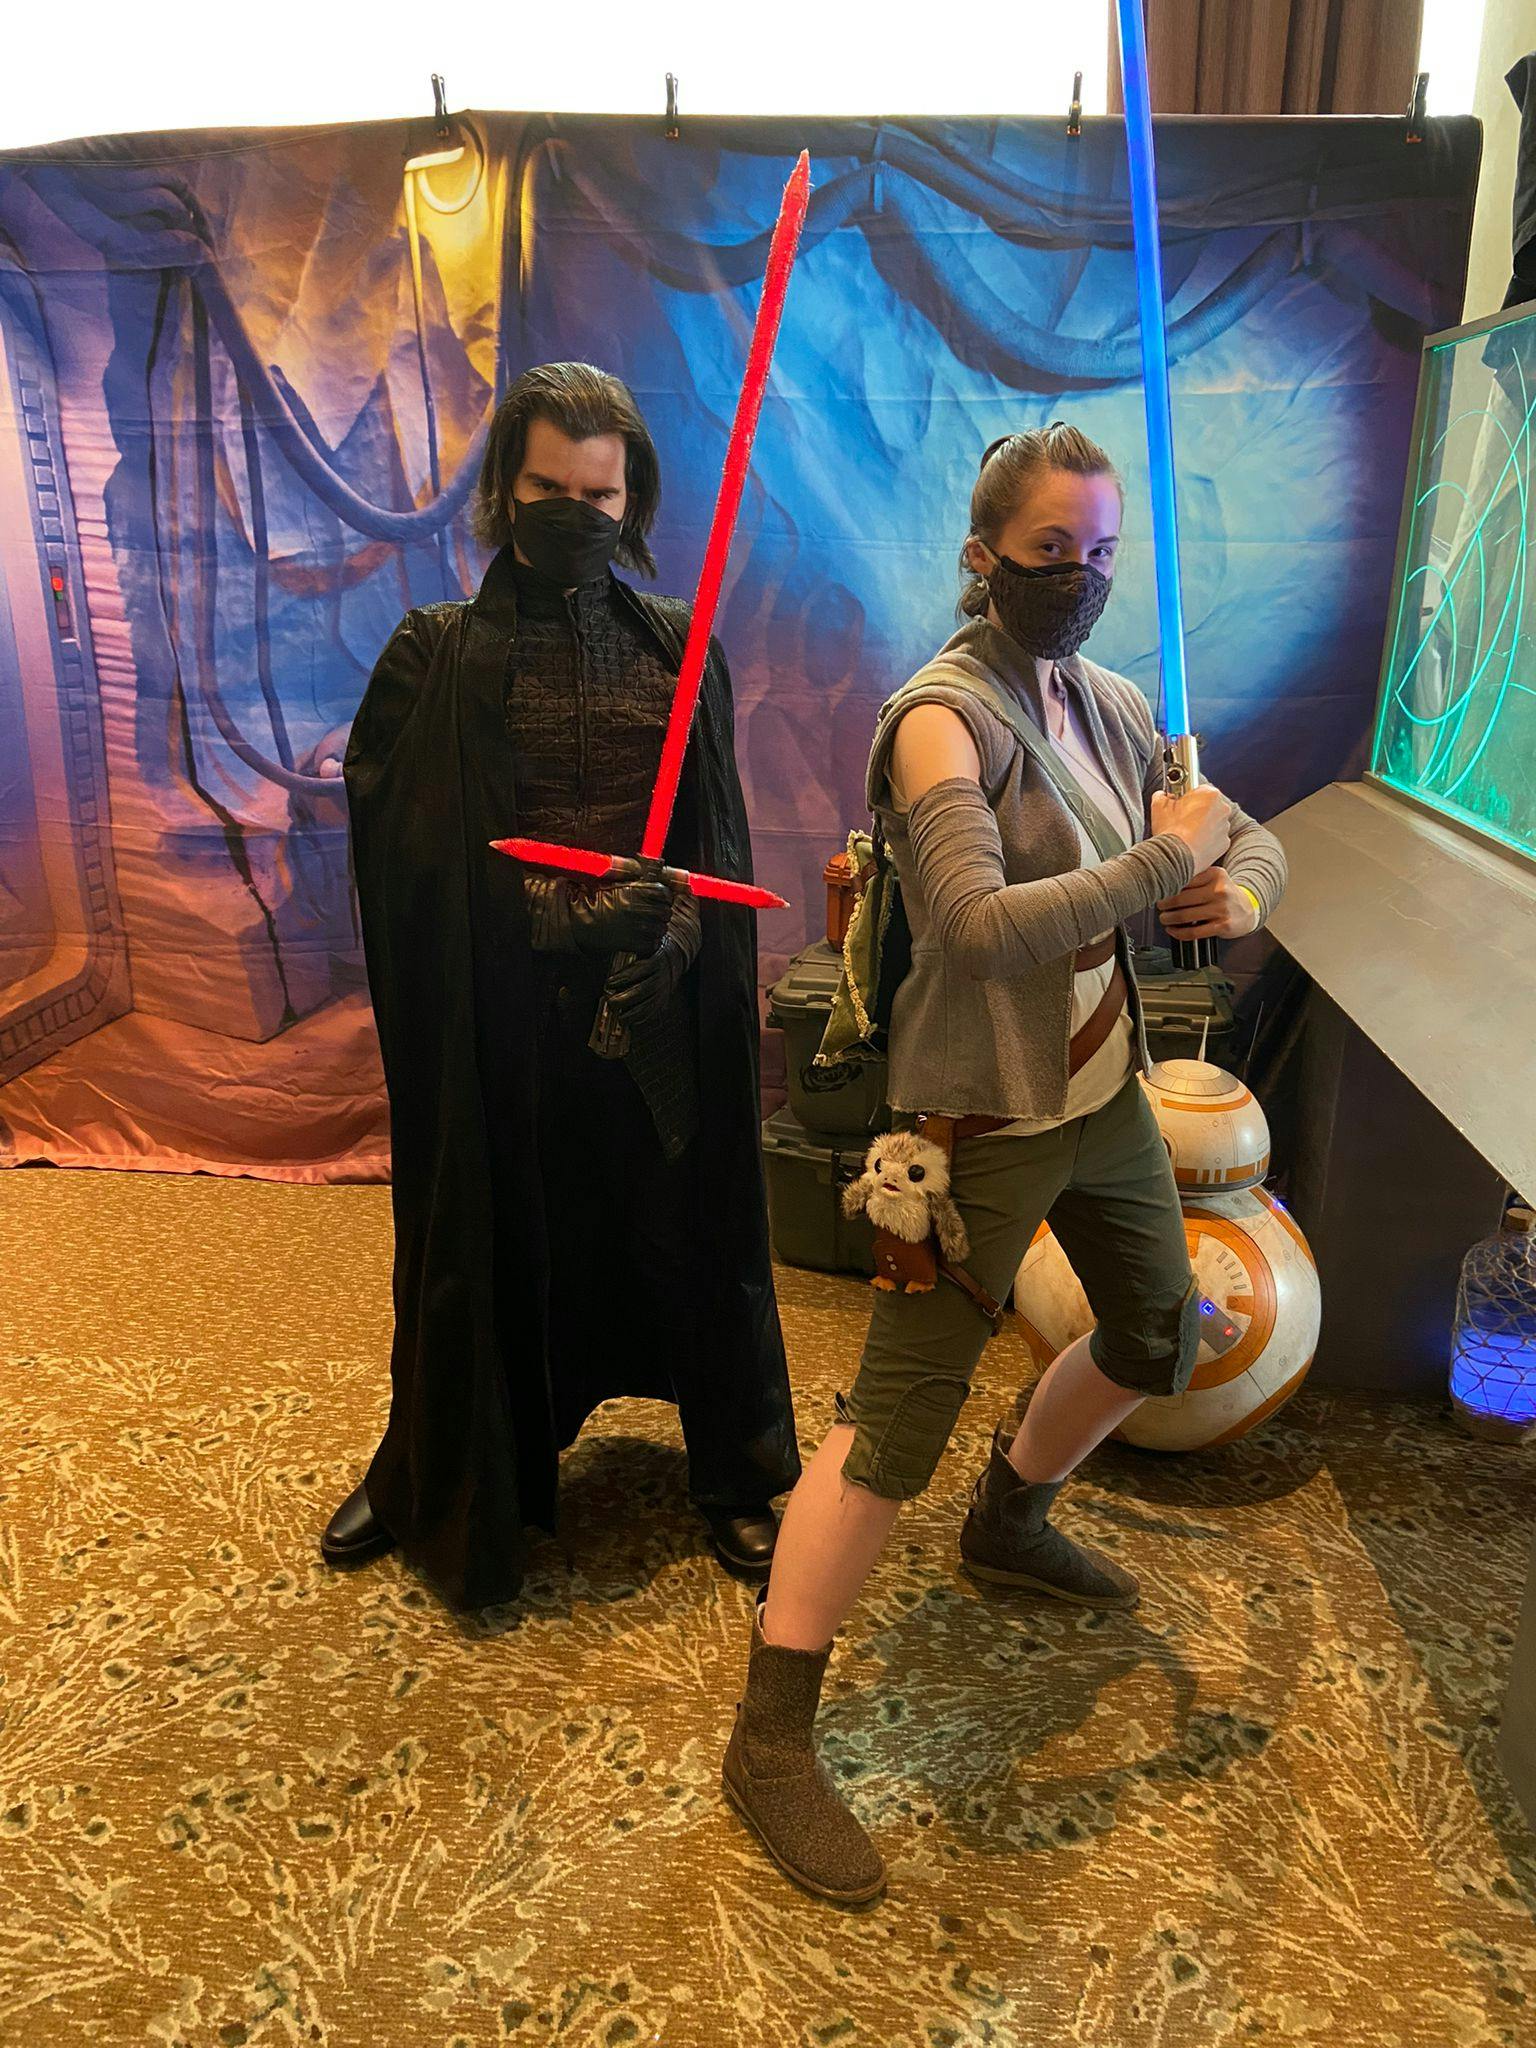 Edited Star Wars cosplays at Wicked Comic Con Boston